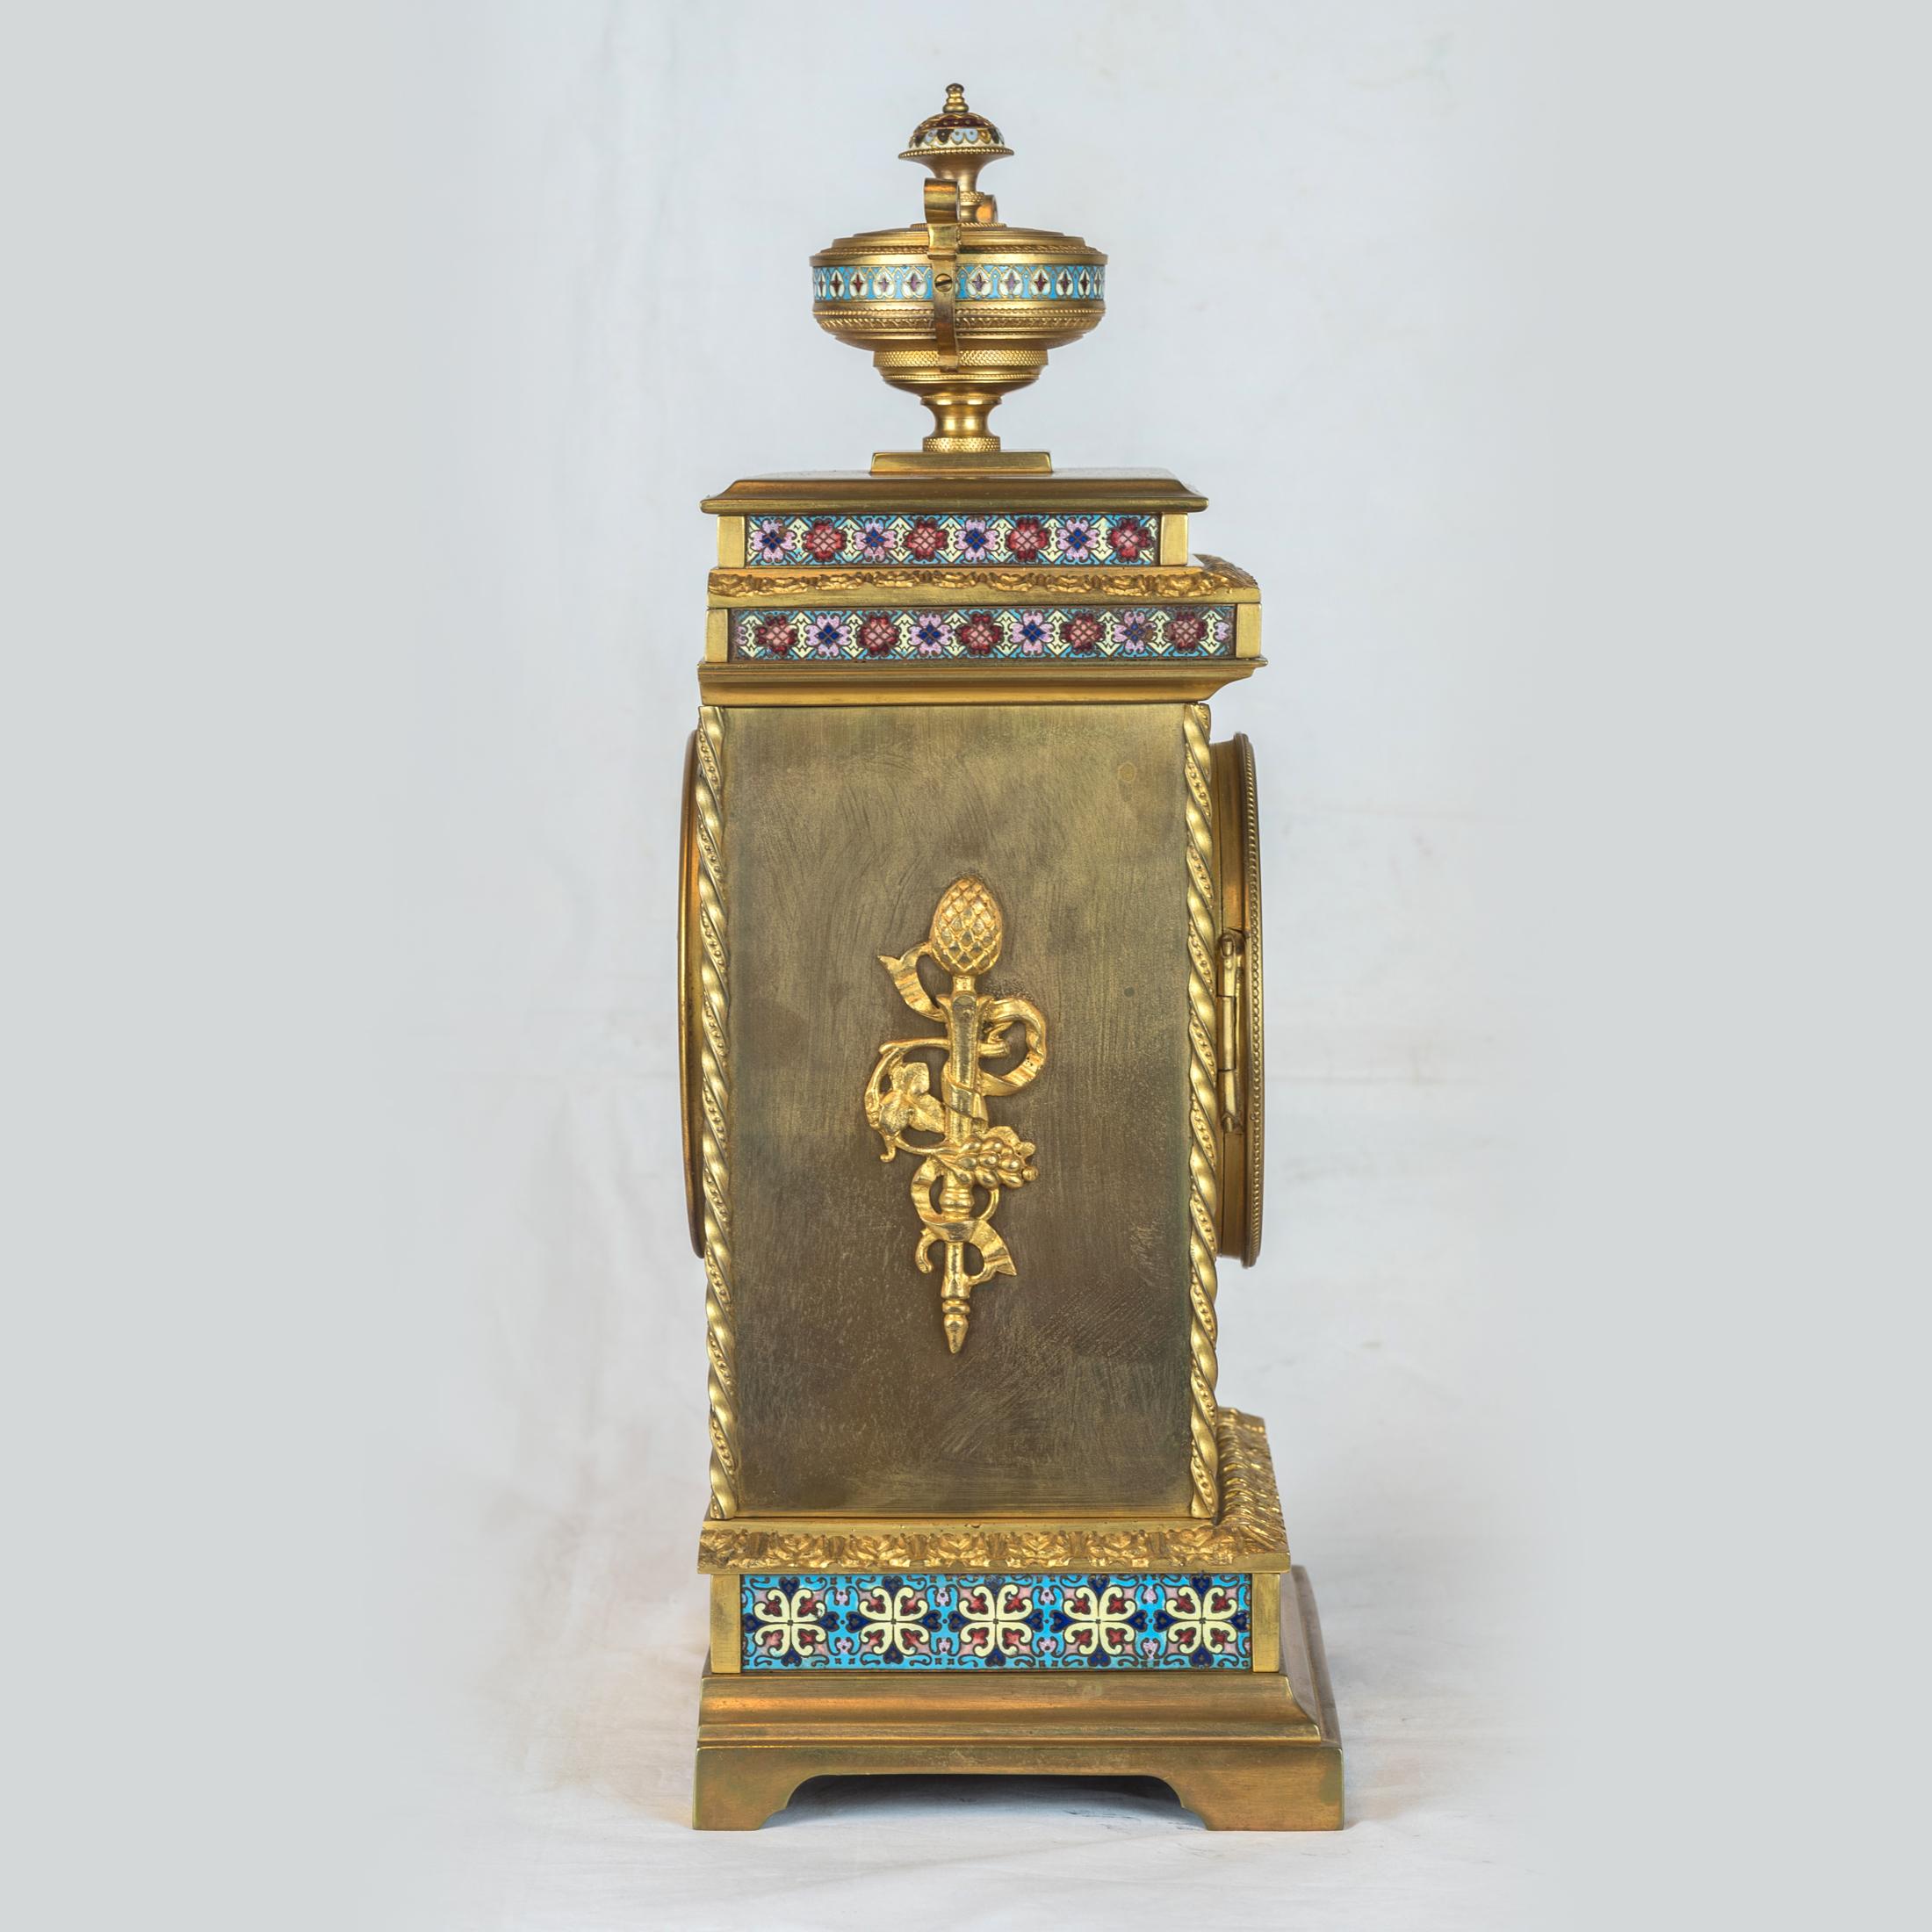 Fabulous Late 19th Century French Champleve Enamel and Gilt-Bronze Mantel Clock In Good Condition For Sale In New York, NY